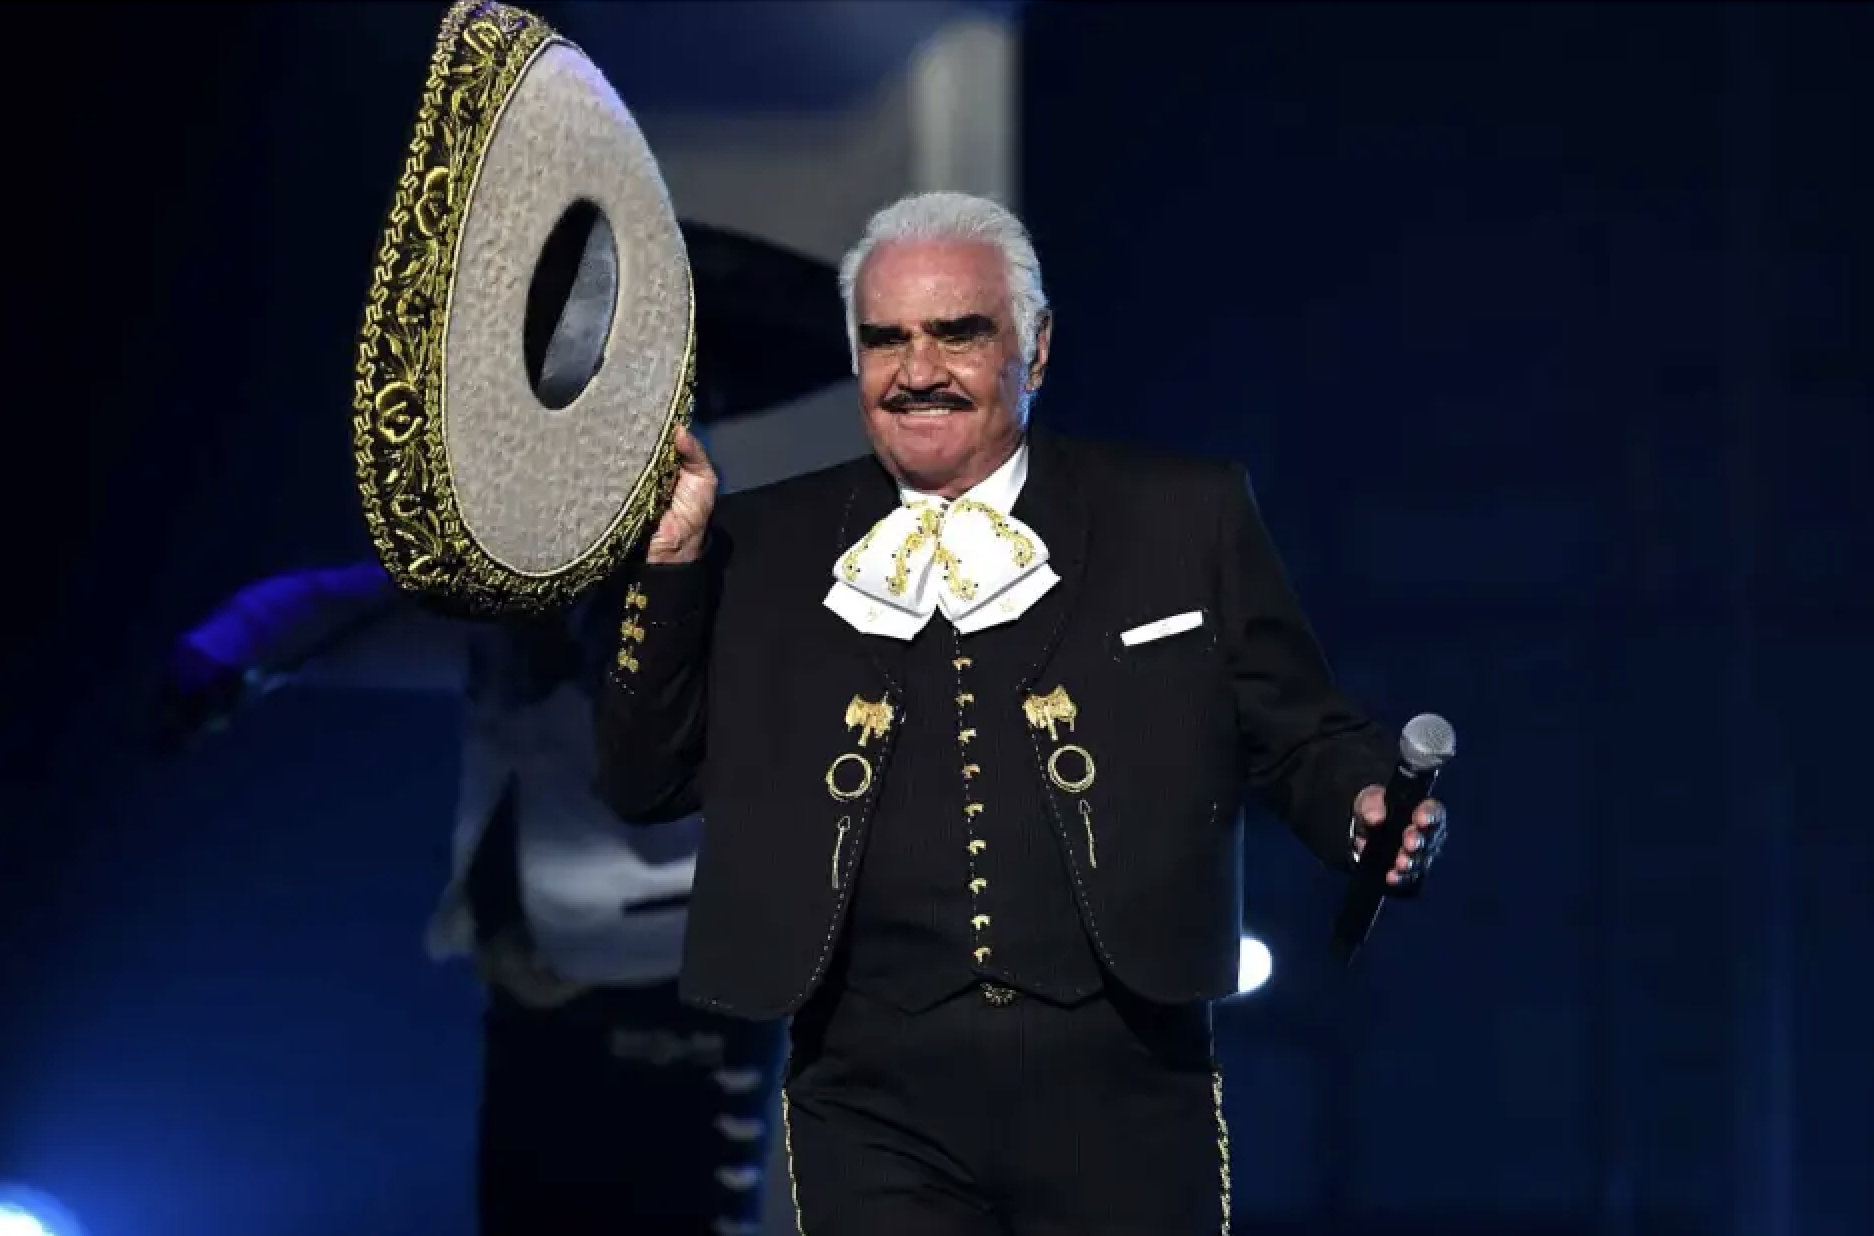 Vicente Fernández’s Legacy Continues With New Album ‘Le Canta a los Grandes Compositores’